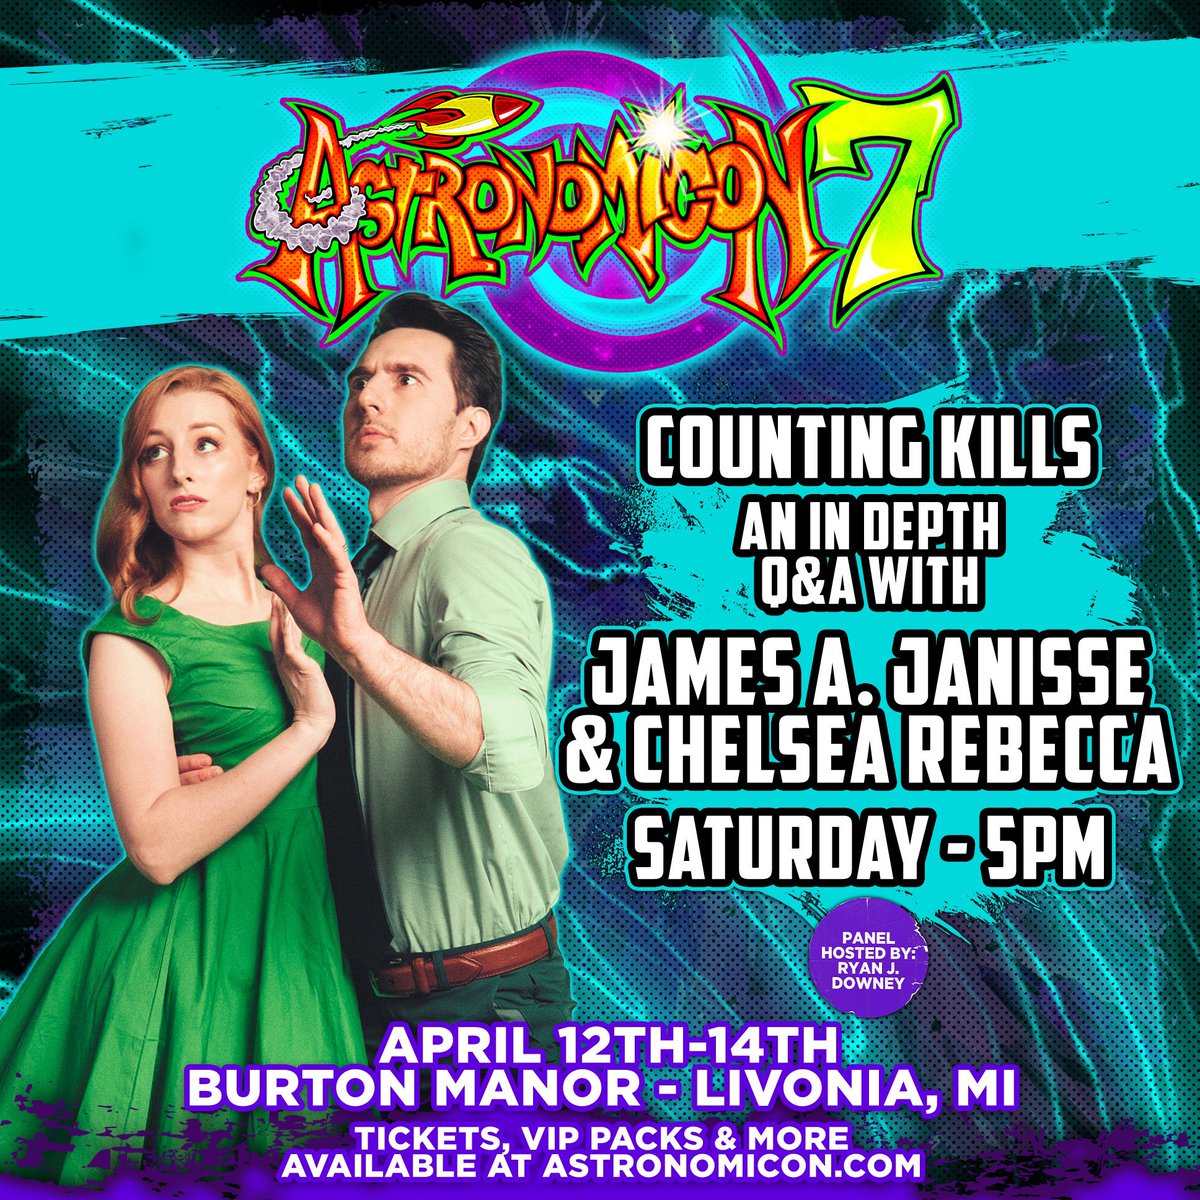 Don’t miss the🩸Counting Kills🩸 Panel at 5PM on Saturday. Ryan J. Downey will be hosting a Q & A with Dead Meat’s James A. Janisse and Chelsea. Be there 🔪🔪🔪 Grab your tickets: astronomicon.com 🔪@ryandowney 🩸@JamesAJanisse 🔪@carebecc 🩸@deadmeatjames